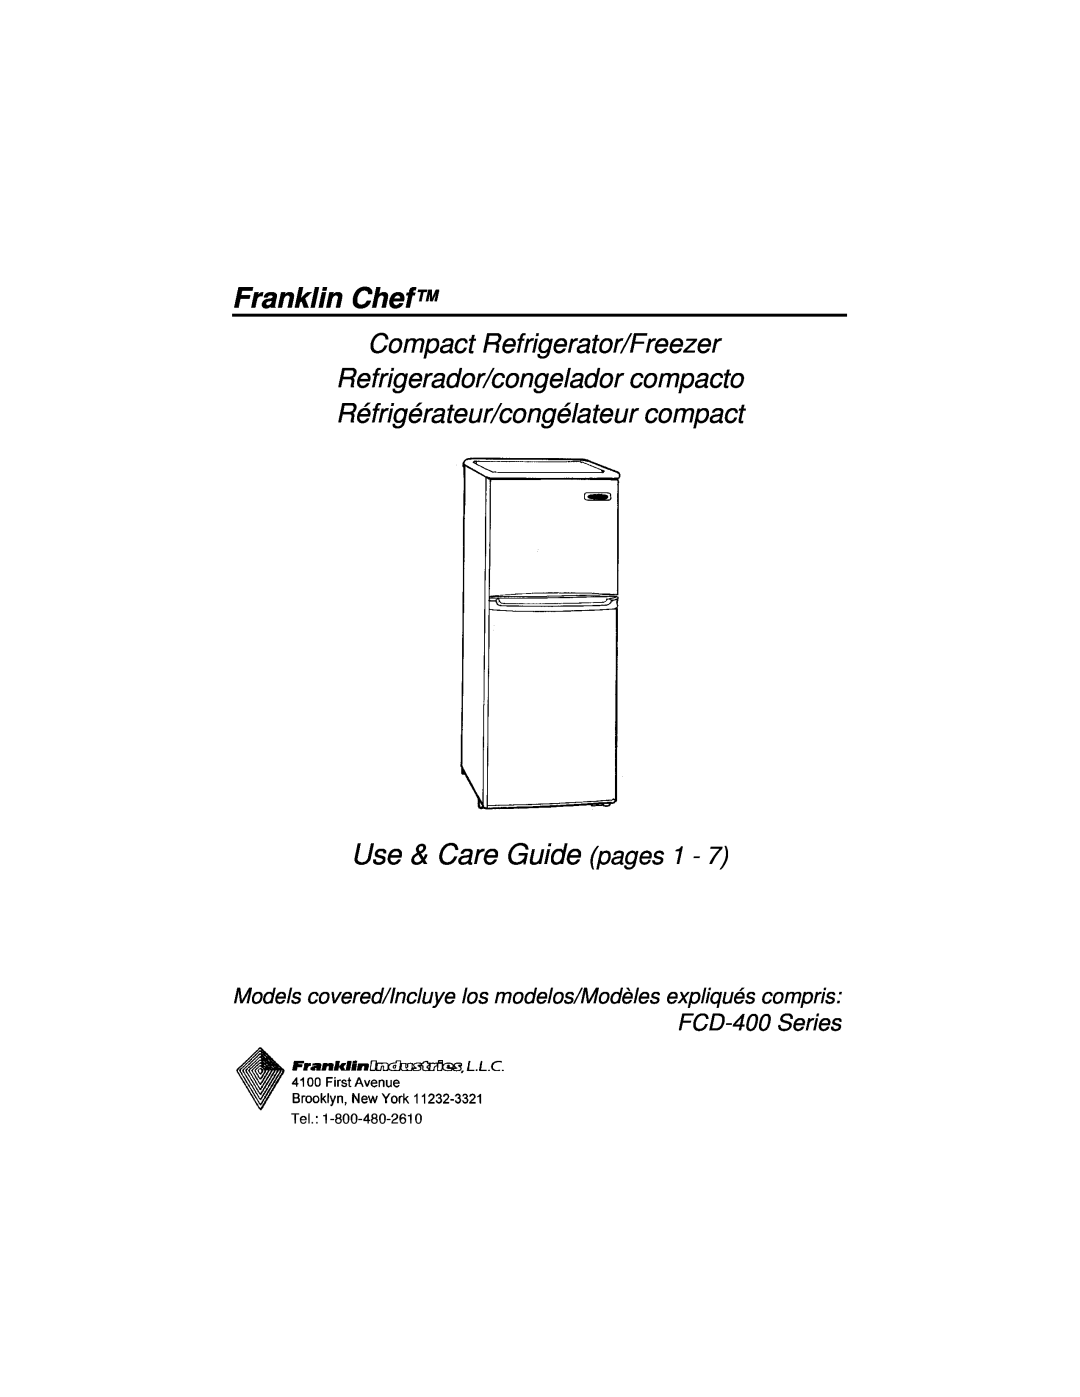 Franklin Industries, L.L.C FCD-400 manual Franklin Chef, Use & Care Guide pages 1, Compact Refrigerator/Freezer 